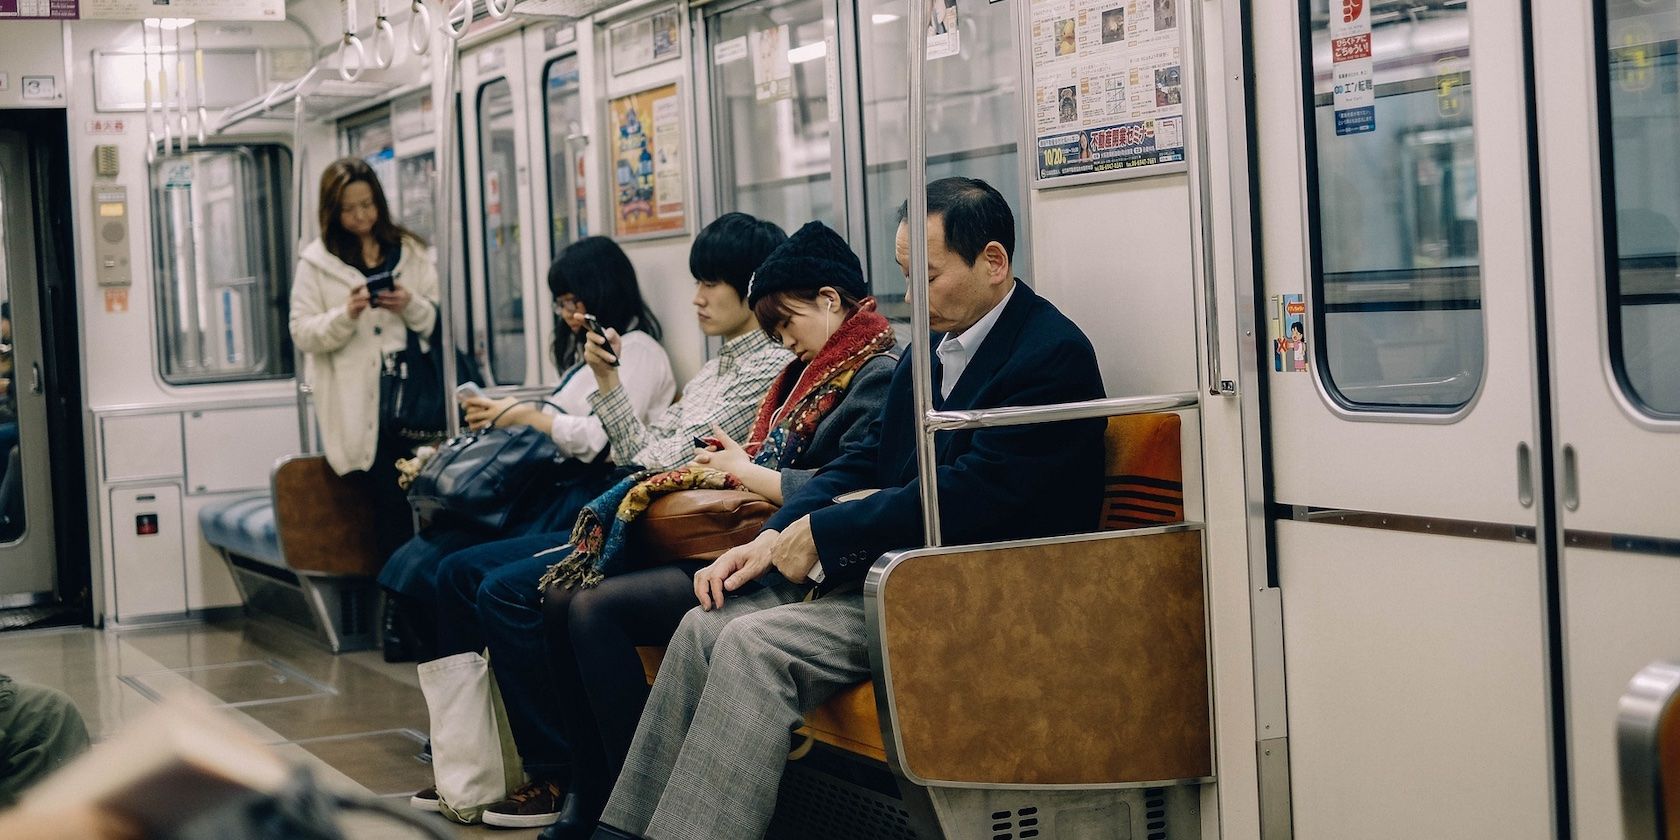 People in a subway train